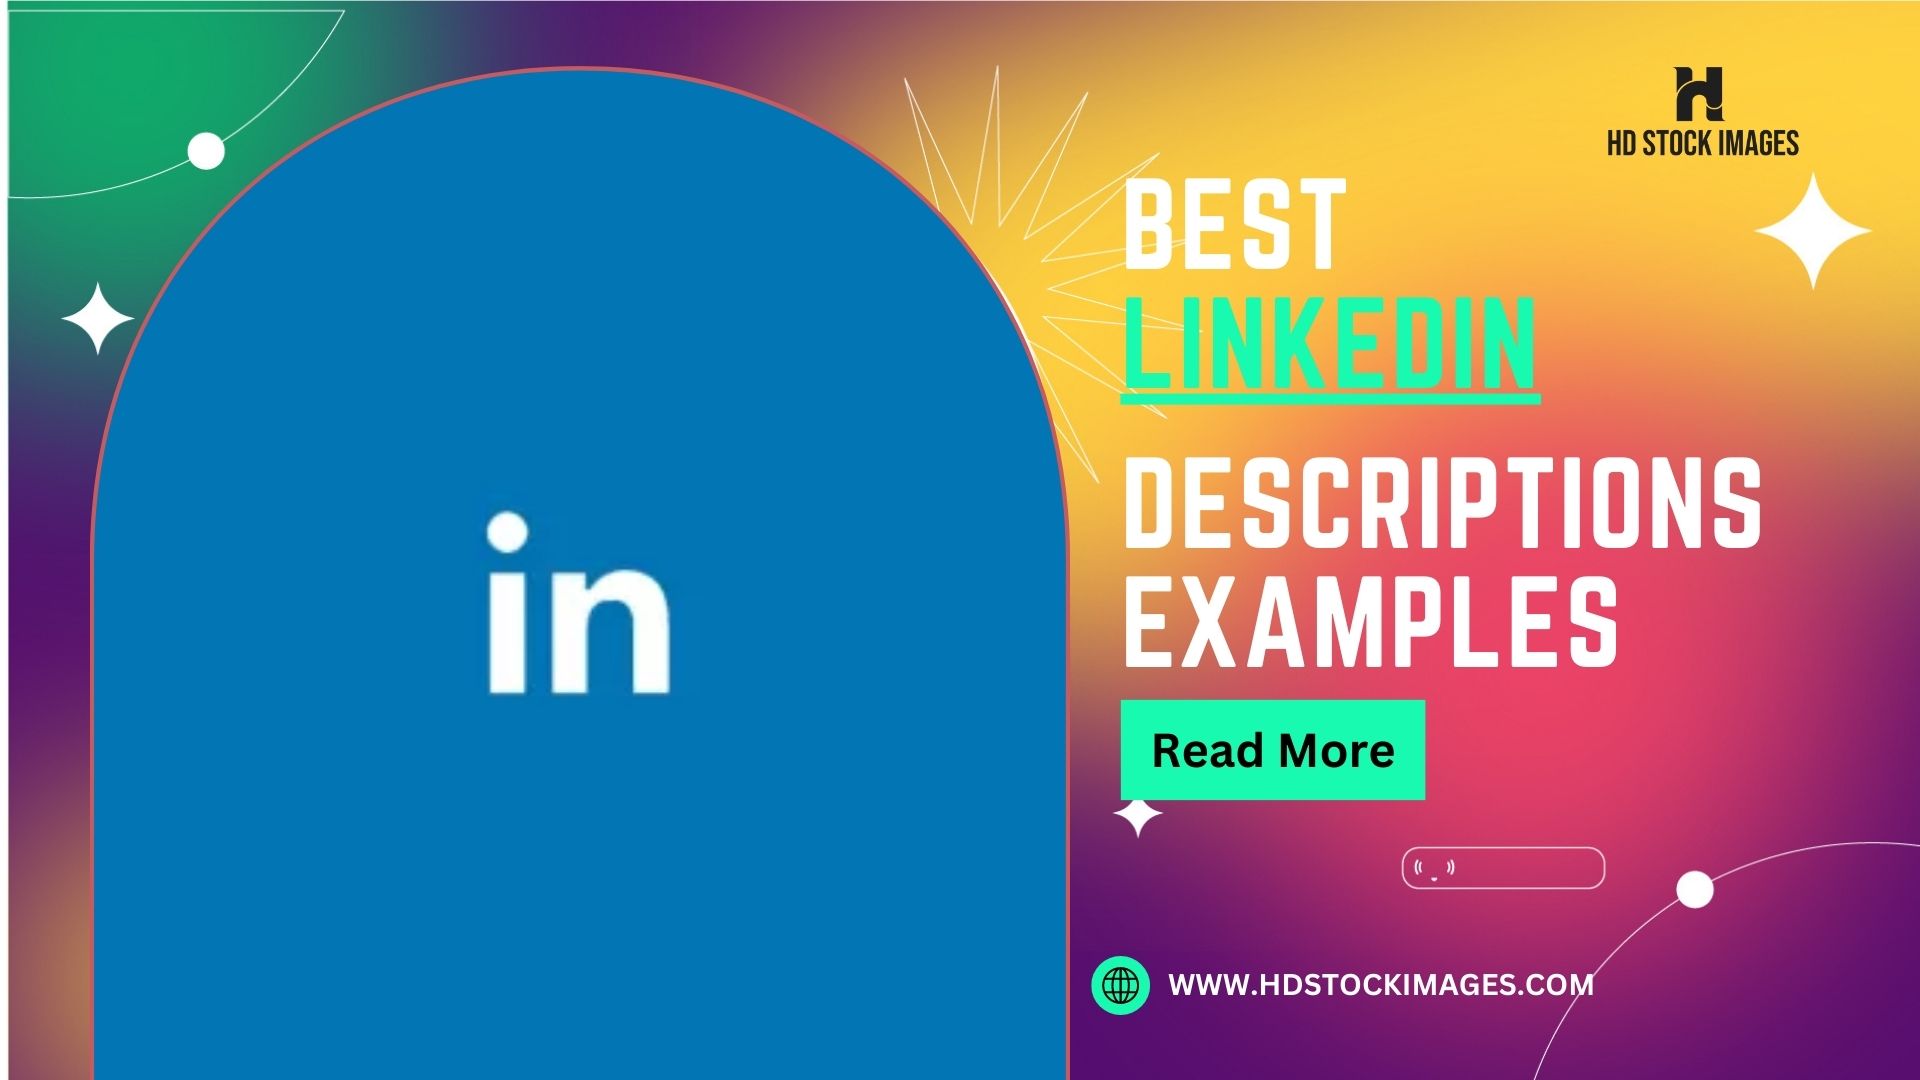 an image of Best Linkedin Experience Descriptions Examples